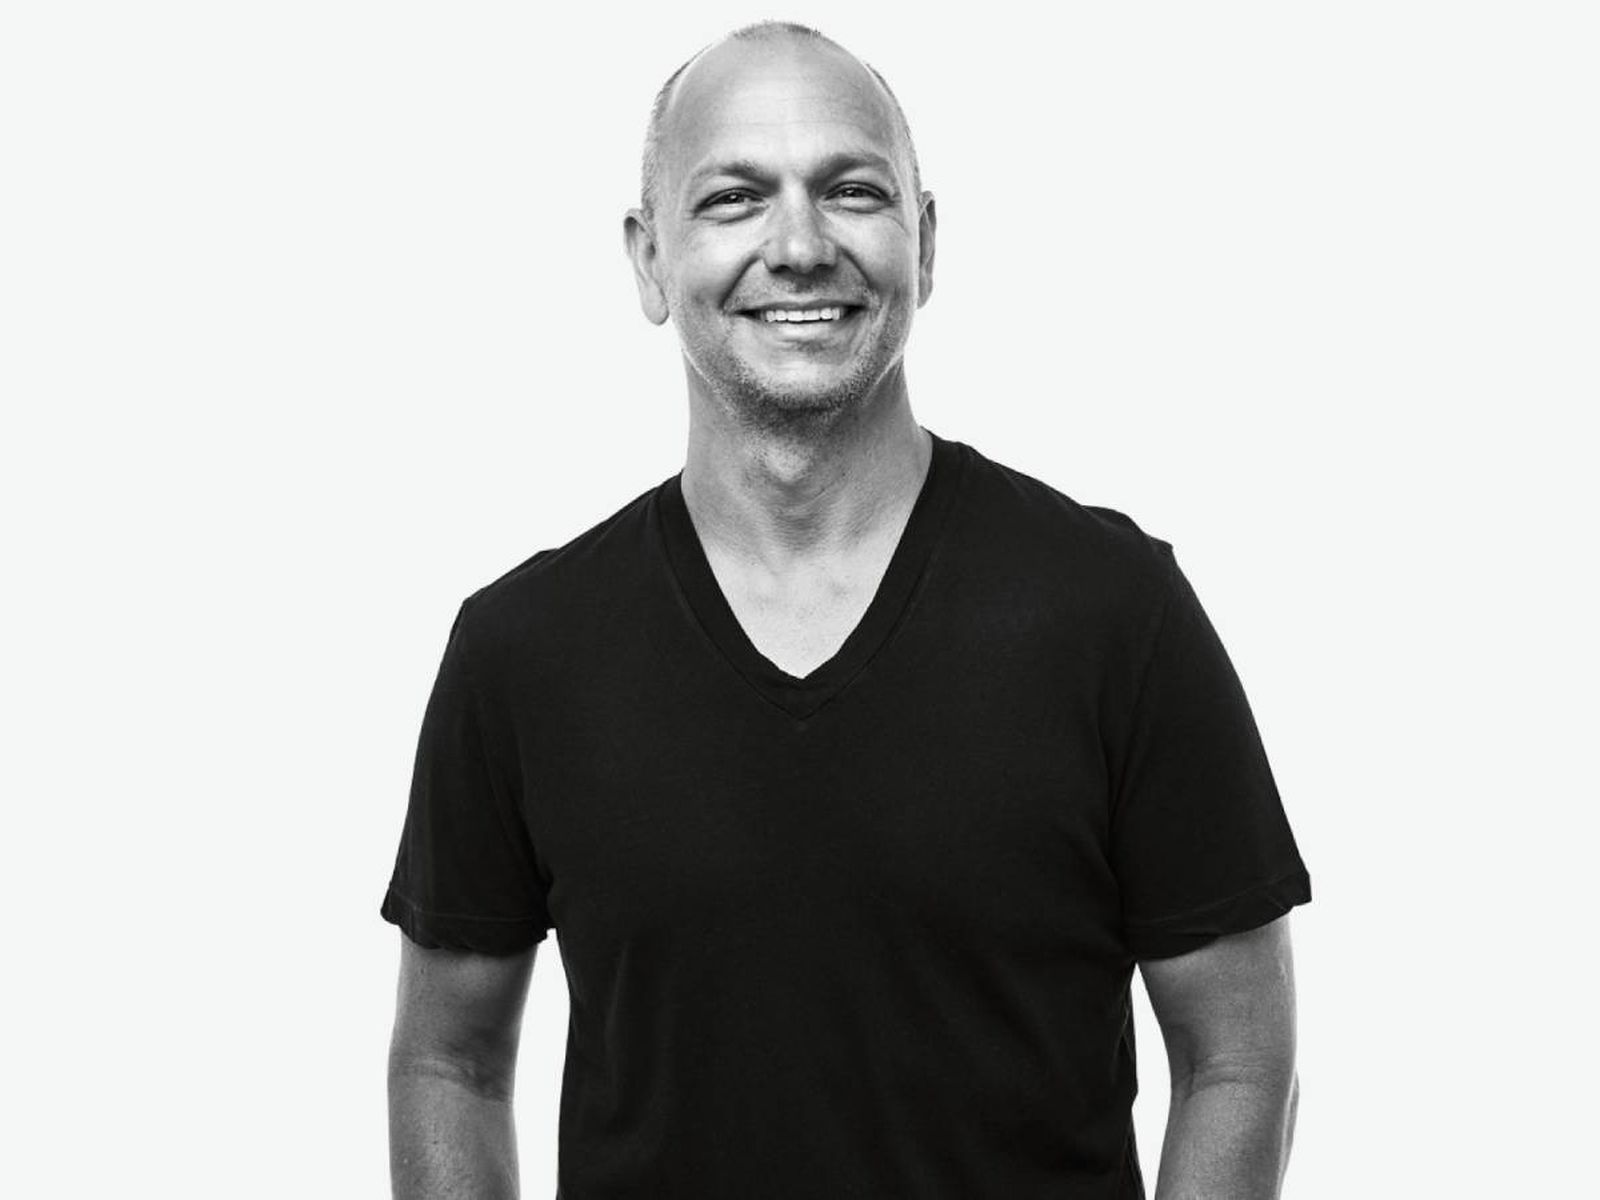 Photo: Tony Fadell, iPod Inventor, Author, Investor, Silicon Valley Engineer